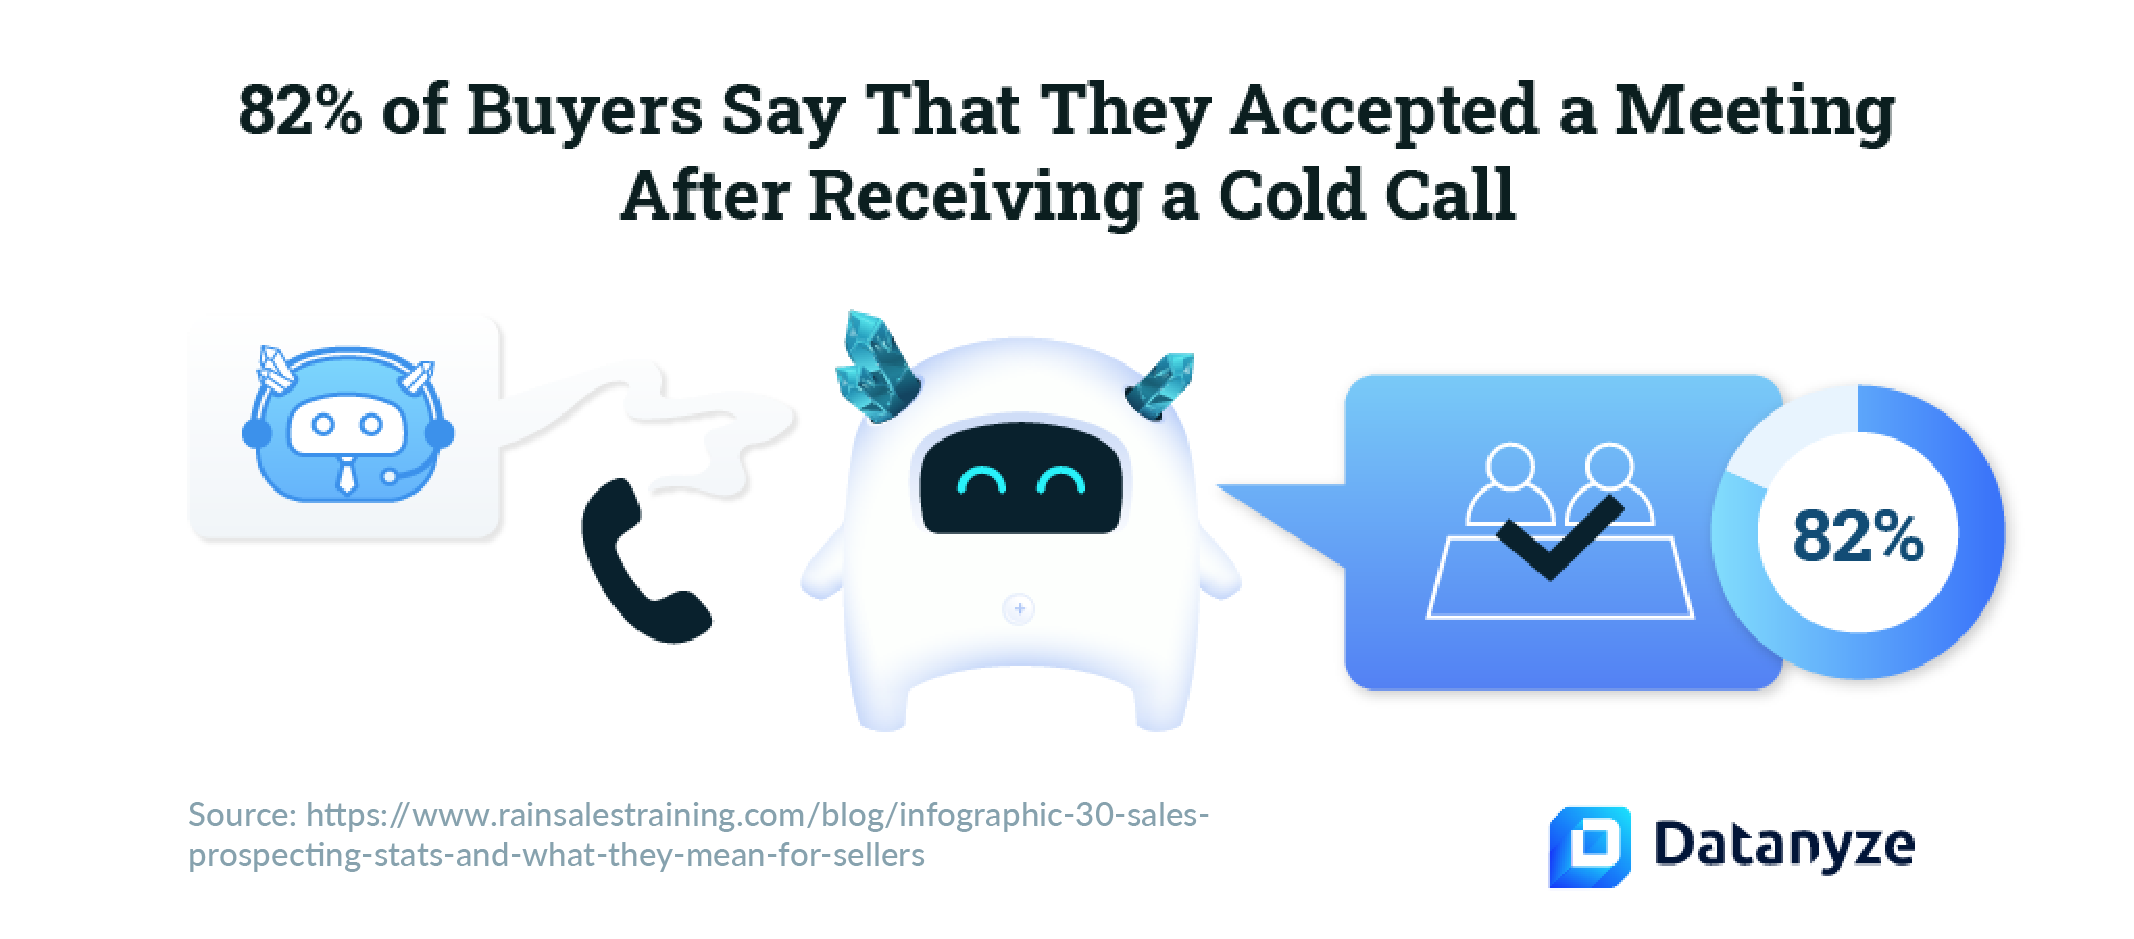 82% of buyers tend to book a meeting after getting a cold call.